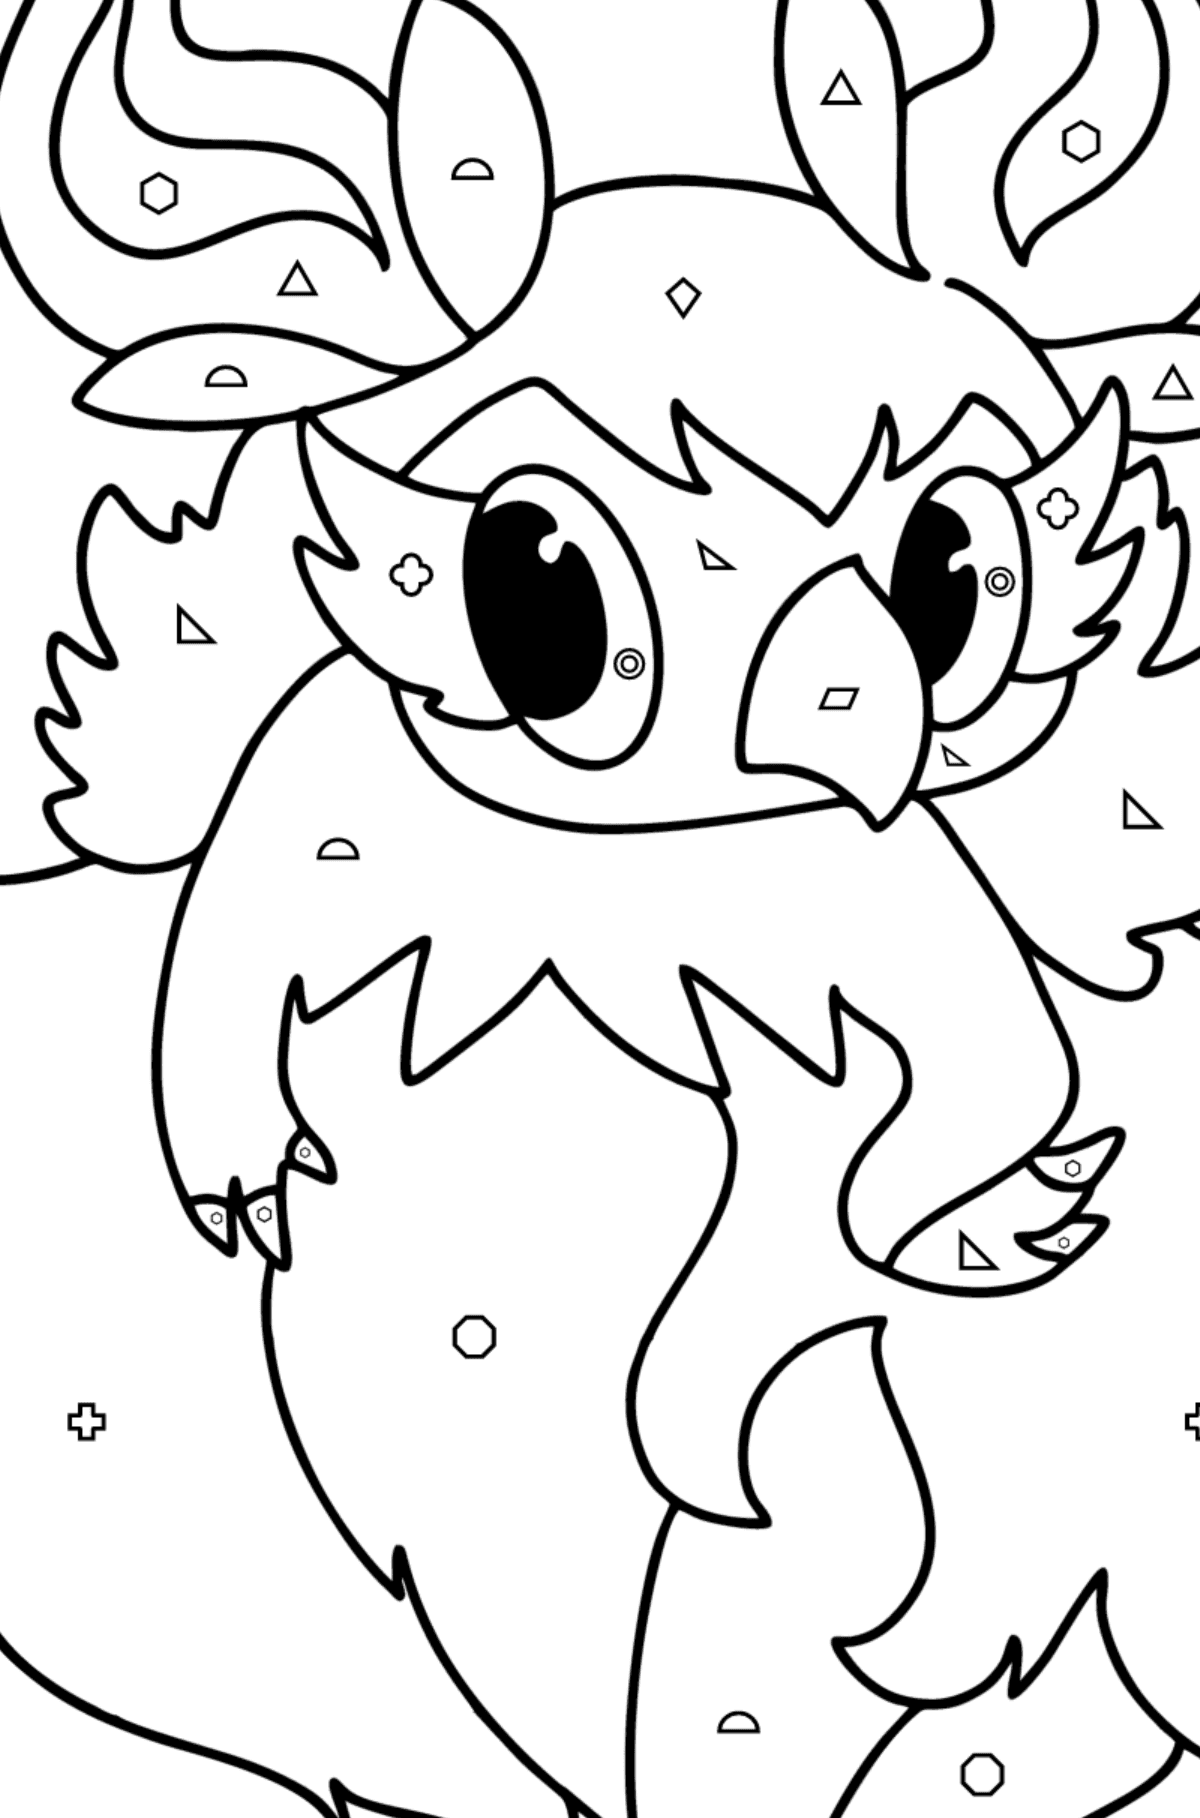 Colouring page Pokémon X and Y Aromatisse - Coloring by Geometric Shapes for Kids